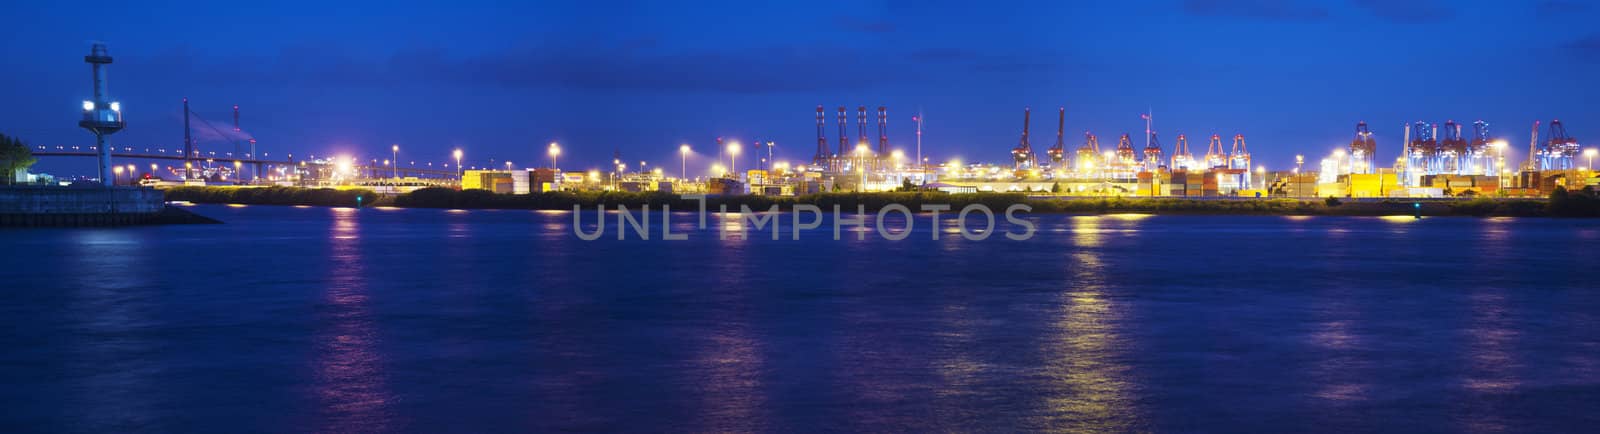 Nightly reflections of container terminal by nprause